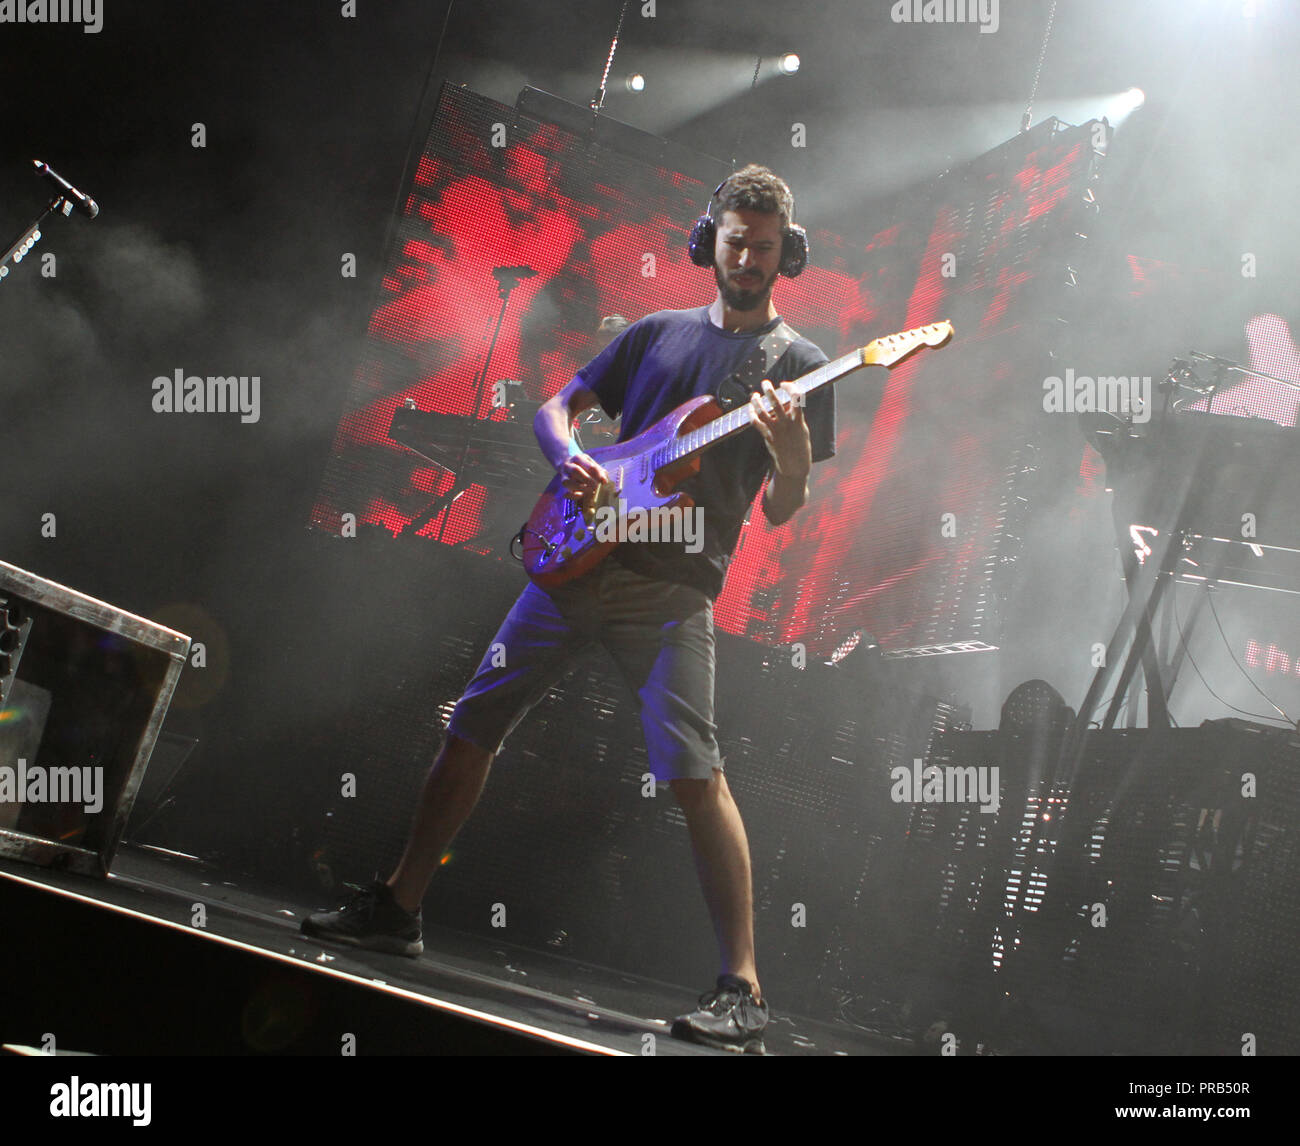 Brad Delson with Linkin Park performs on the opening night of their tour at the Cruzan Amphitheatre in West Palm Beach, Florida on August 8, 2014. Stock Photo